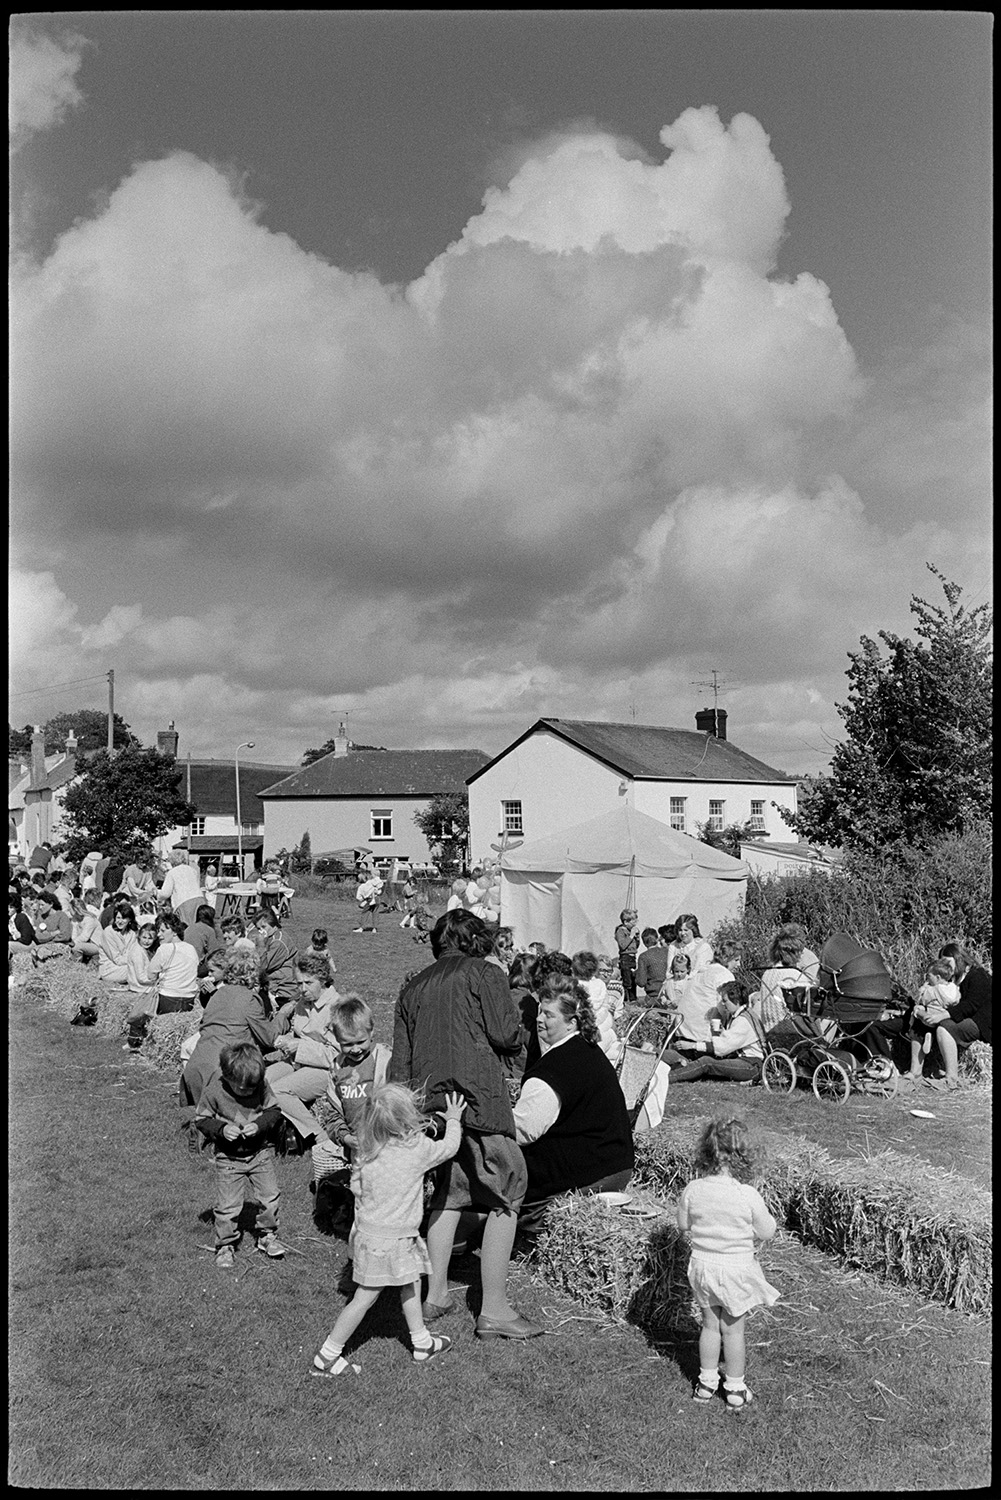 School sports day, races ,people having tea and cakes from trestle tables. 
[Parents and children sat on hay bales having refreshments at Dolton School sports day. Some of the women have prams and a refreshment tent can be seen in the background.]